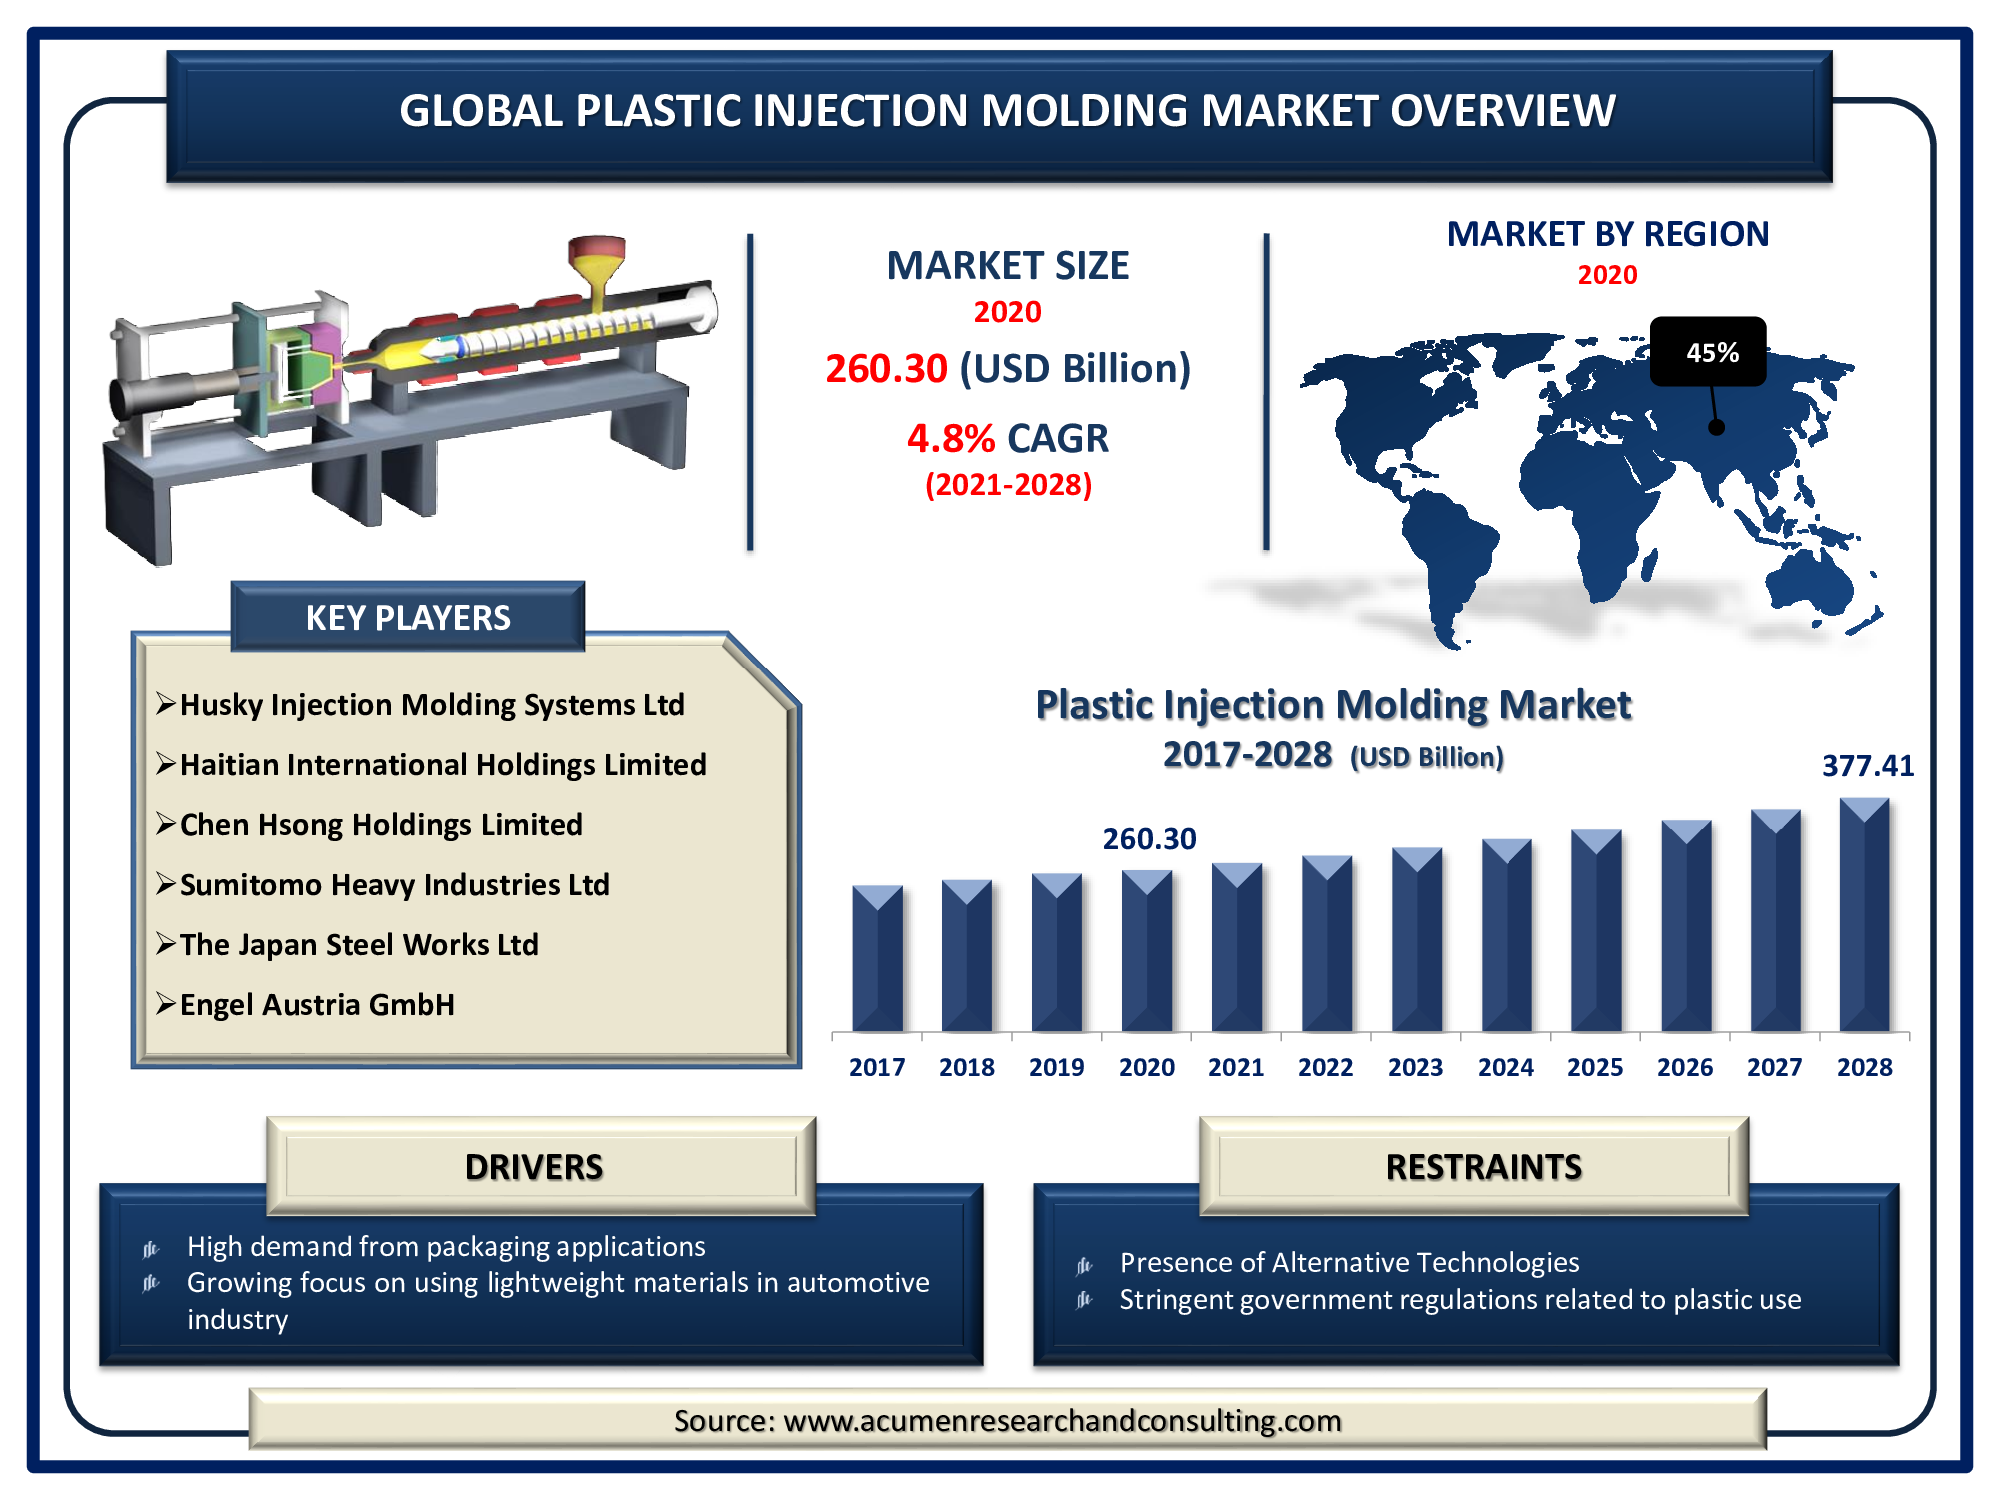 Plastic Injection Molding Market Size was valued at USD 260.30 Billion in 2020 and is predicted to be worth USD 377.41 Billion by 2028, with a CAGR of 4.8% from 2021 to 2028.